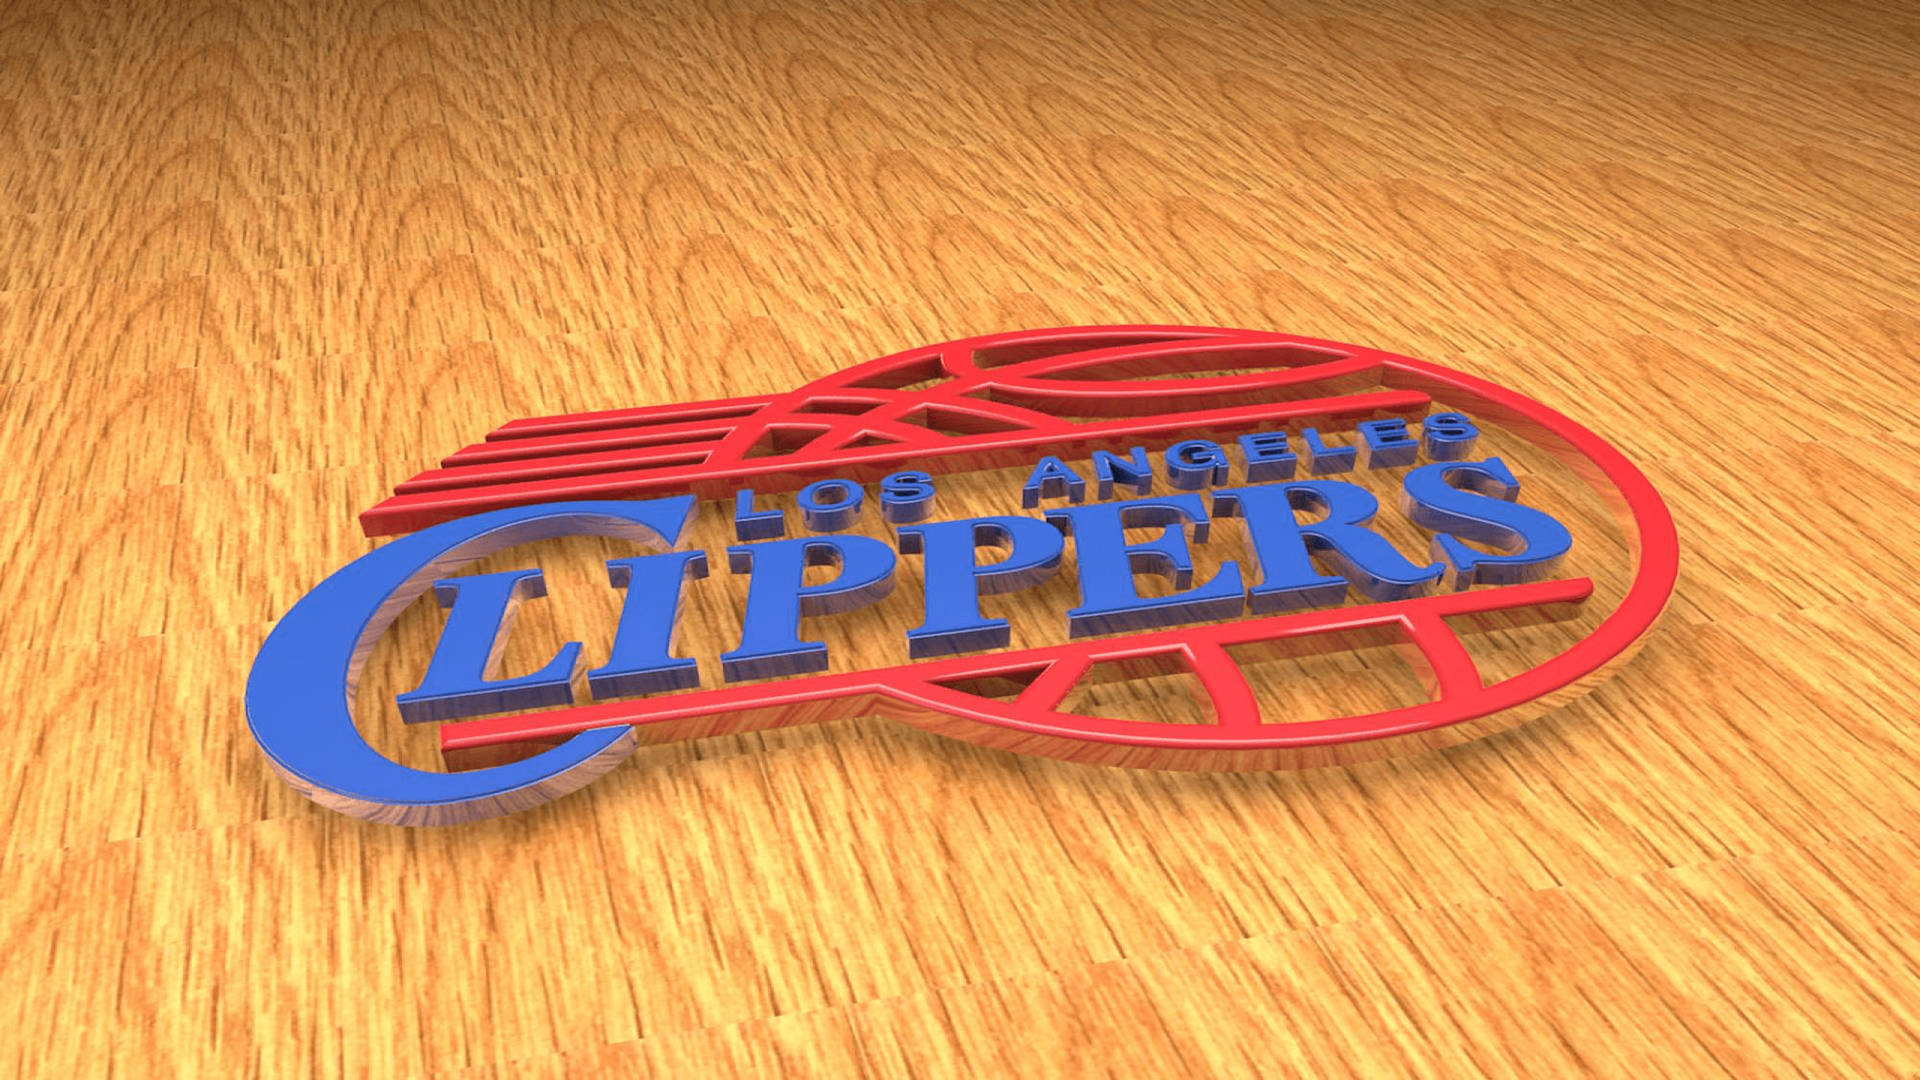 Los Angeles Clippers 3d 1984 Logo Background